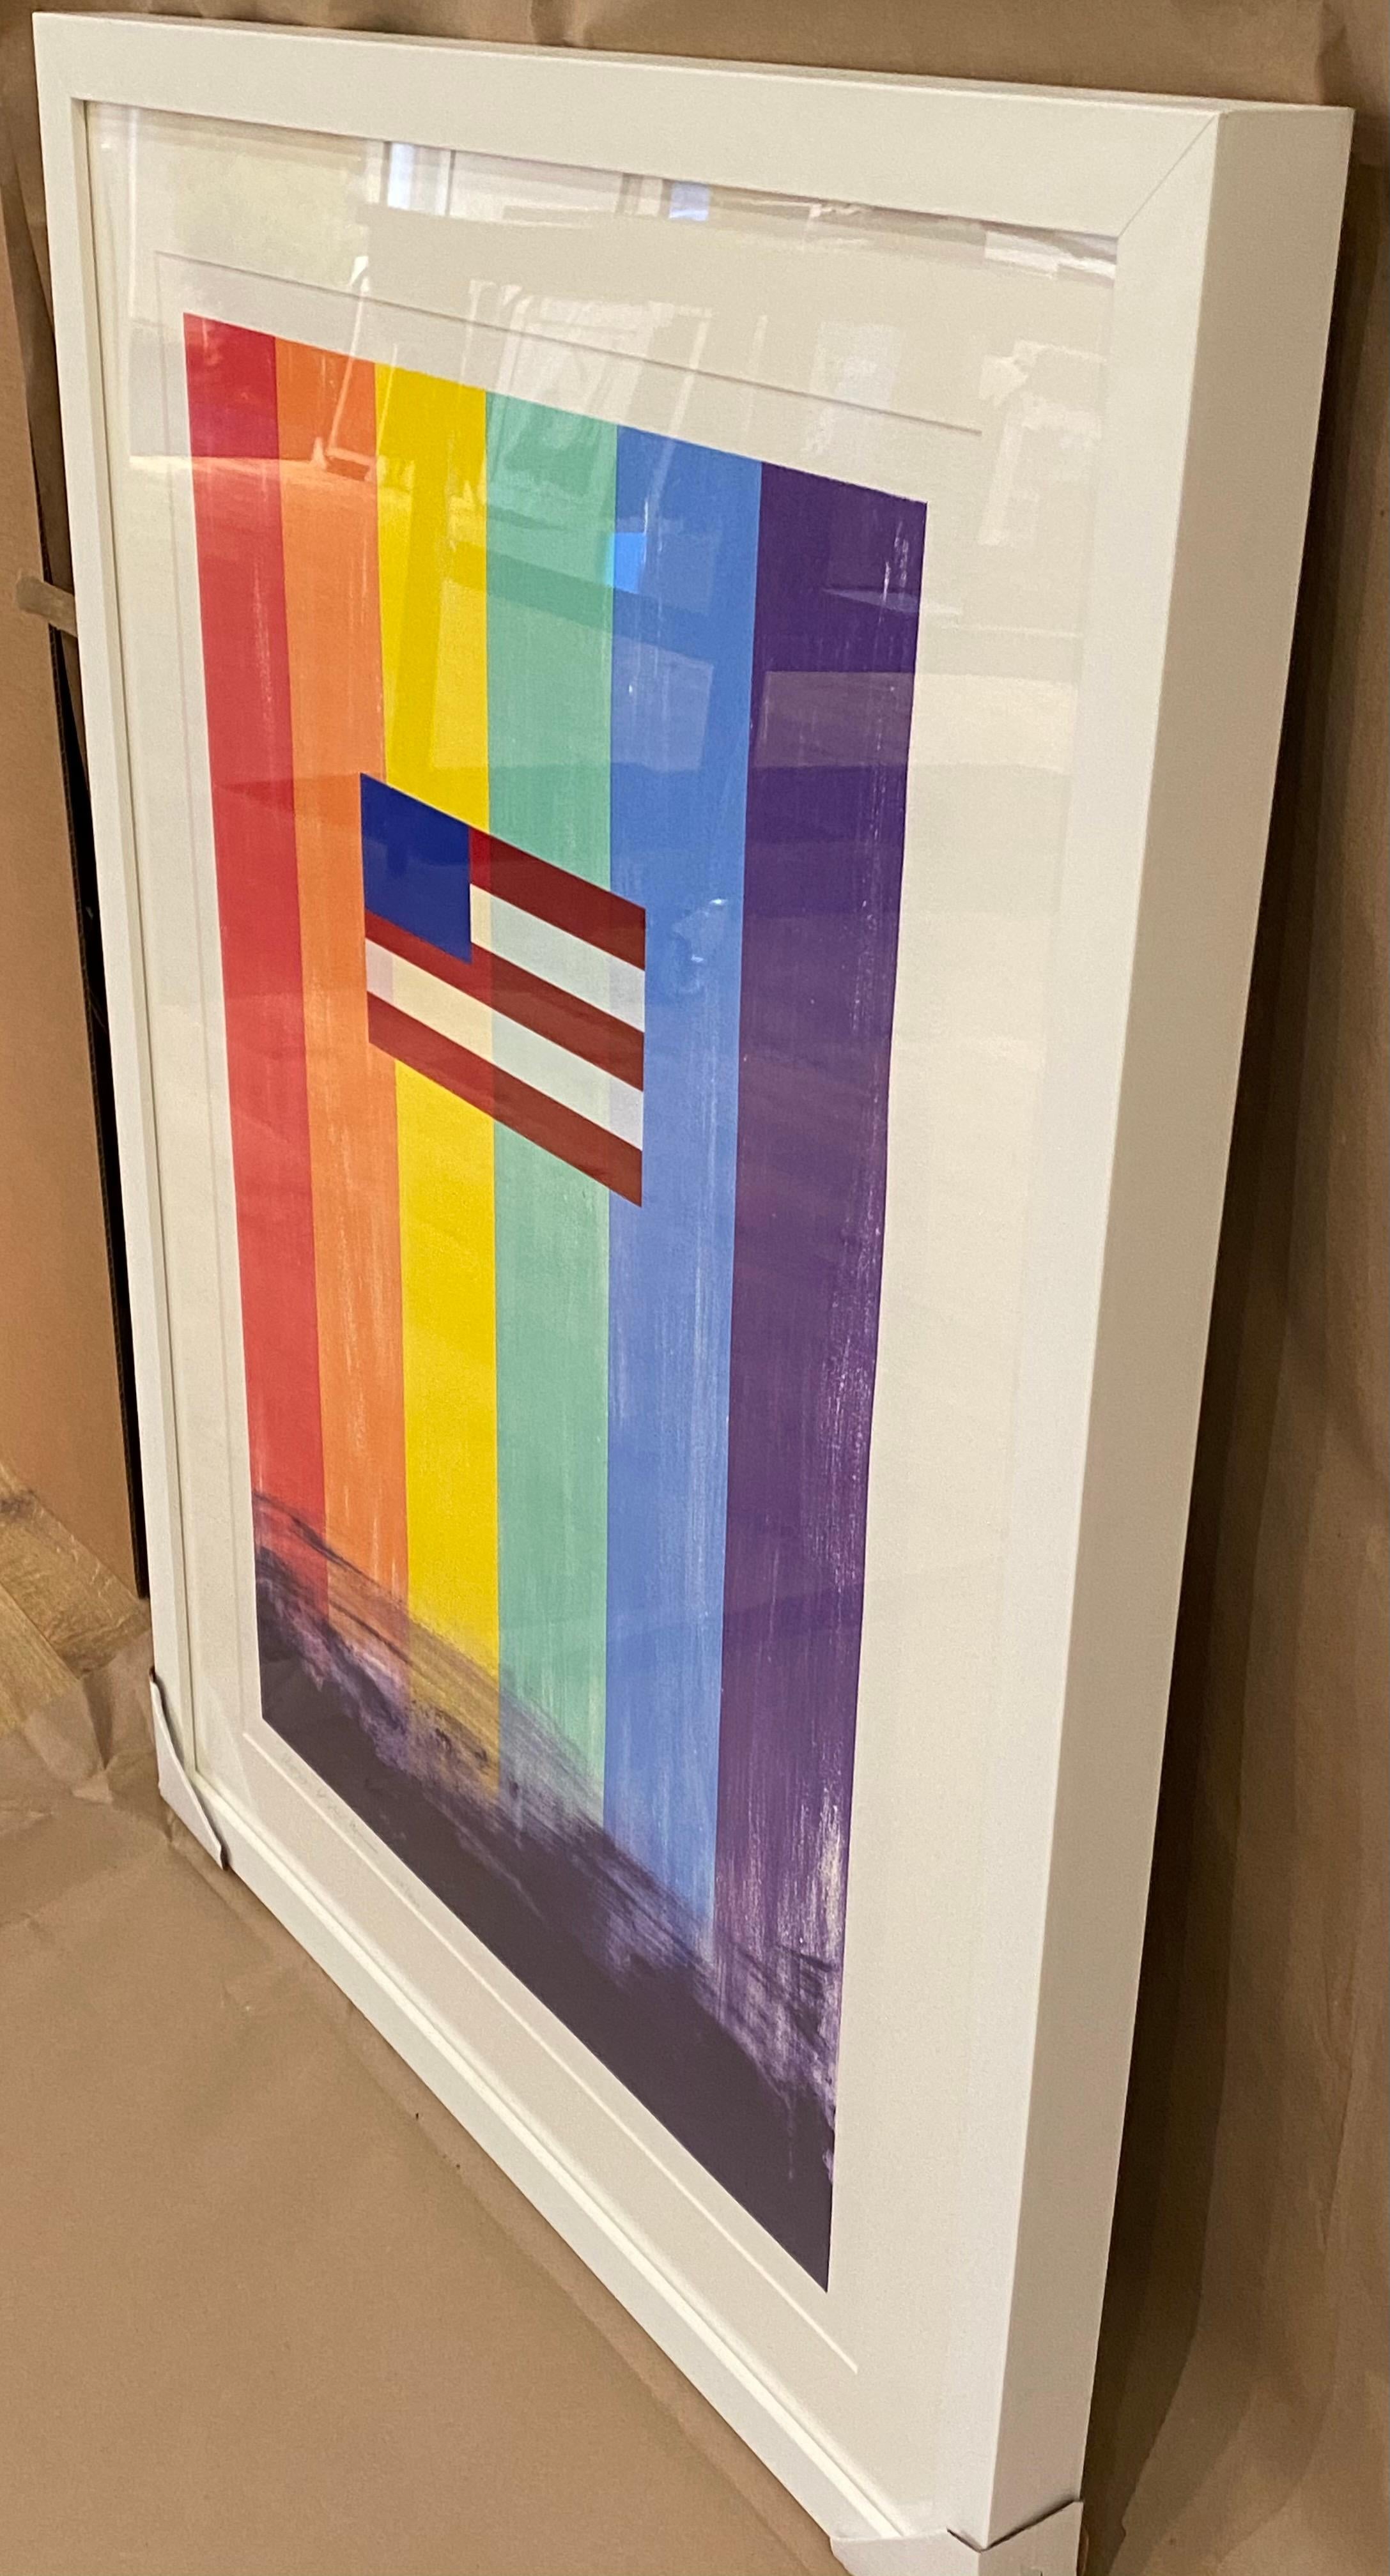 Limited edition lithograph in colors, hand-signed and numbered by the artist. Created in 1993 to benefit the Stonewall Community Foundation of New York. Framed under white matting with large wood white frame. Frame dimensions are  37